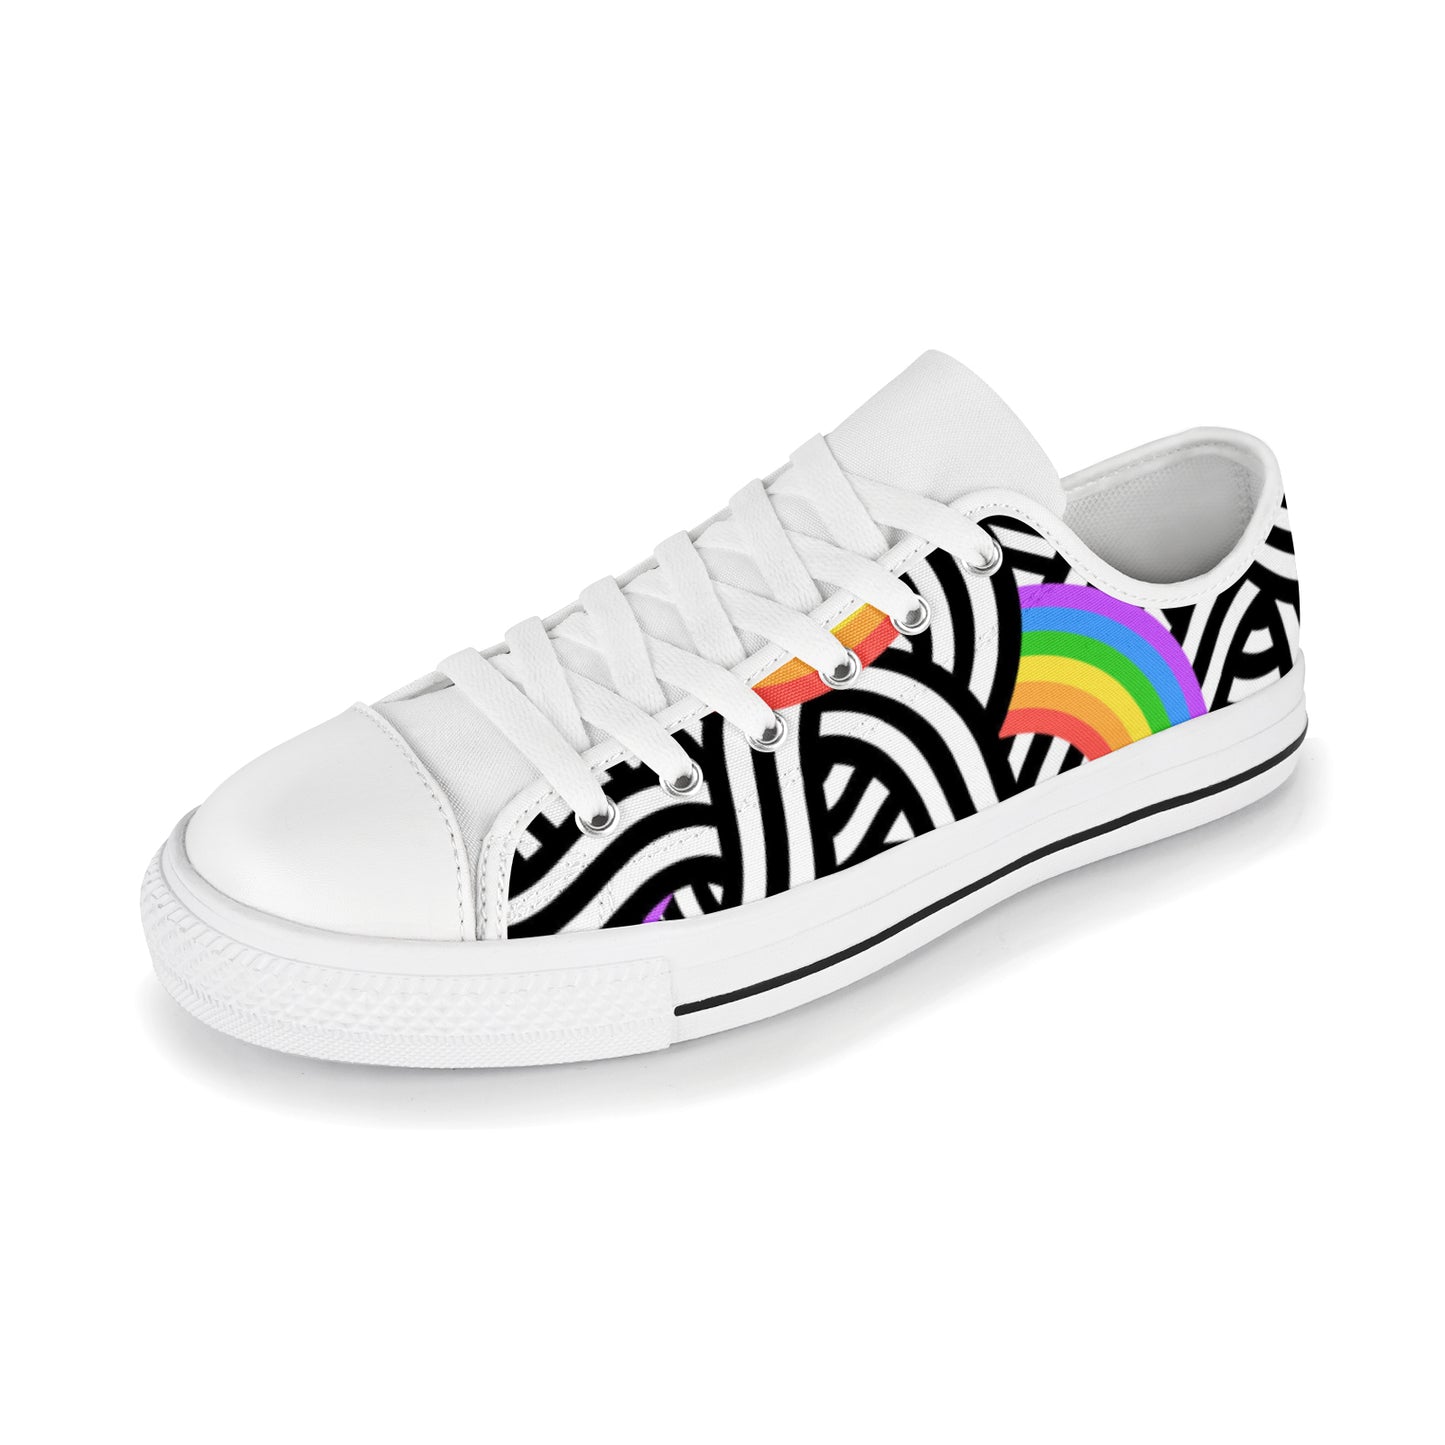 Men's Canvas Sneakers - Black/White with Rainbows